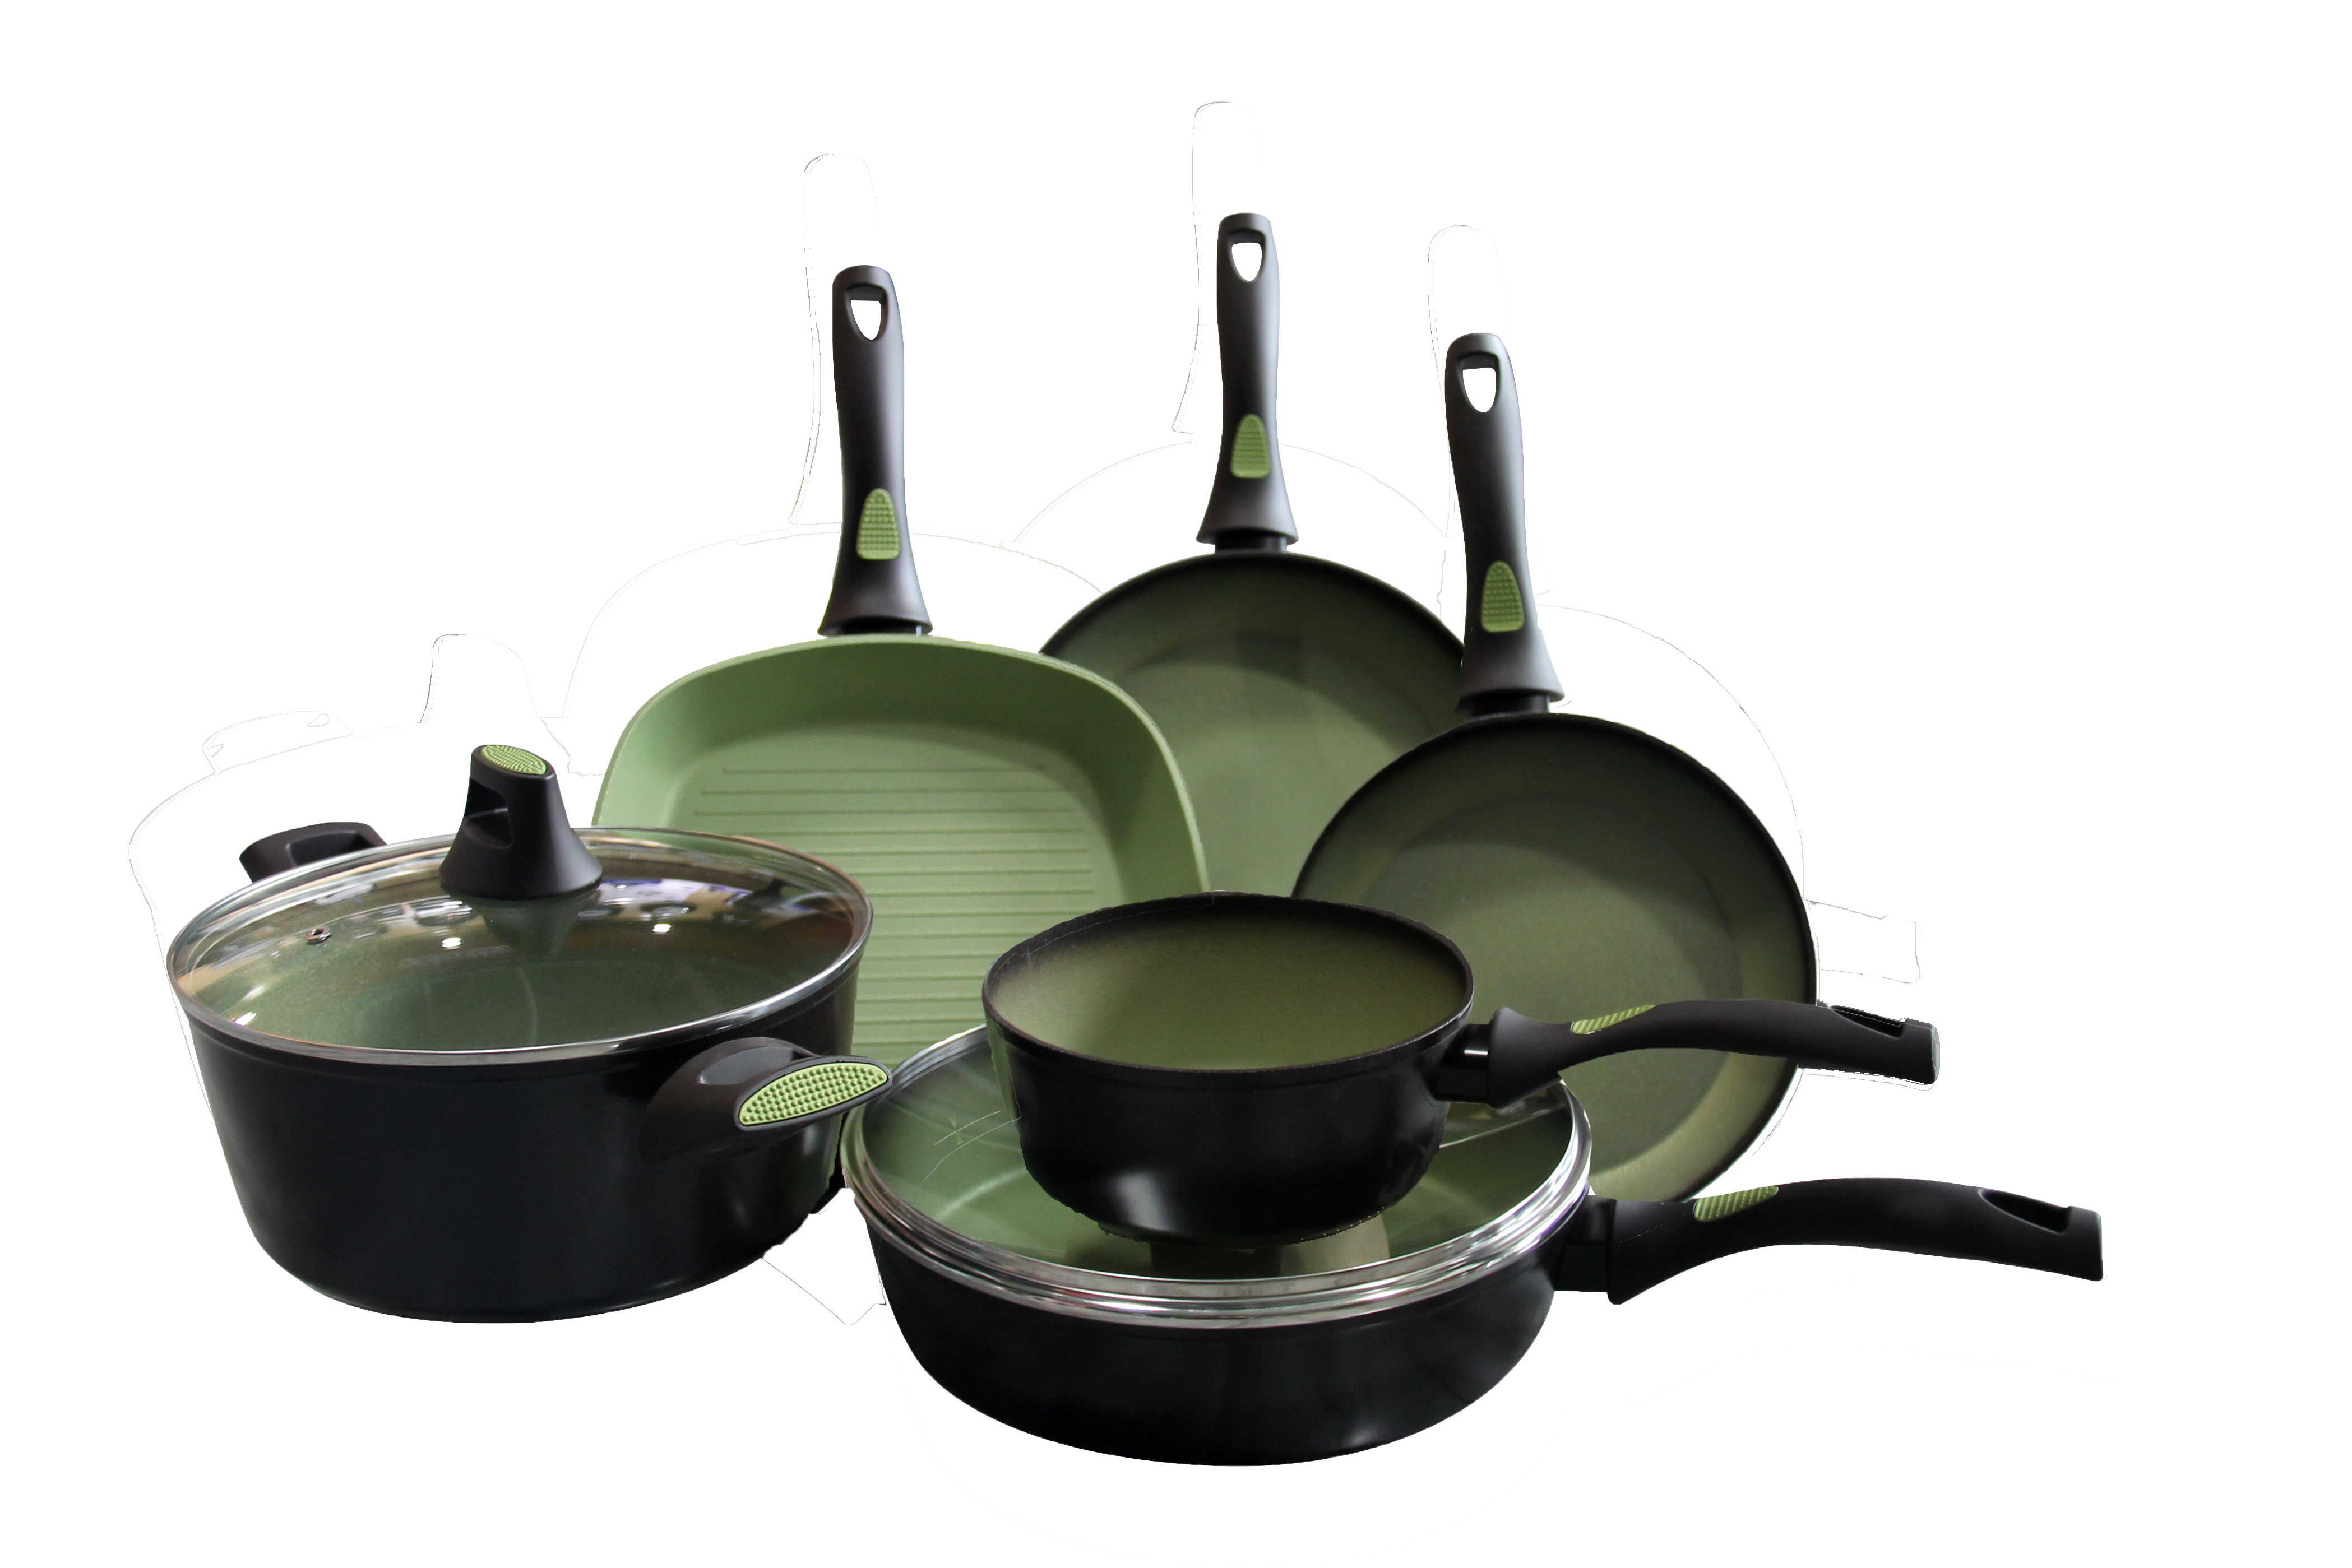 NEWARE AVOCADO 9 Piece Cooking Set with GRIDDLE/ COMAL